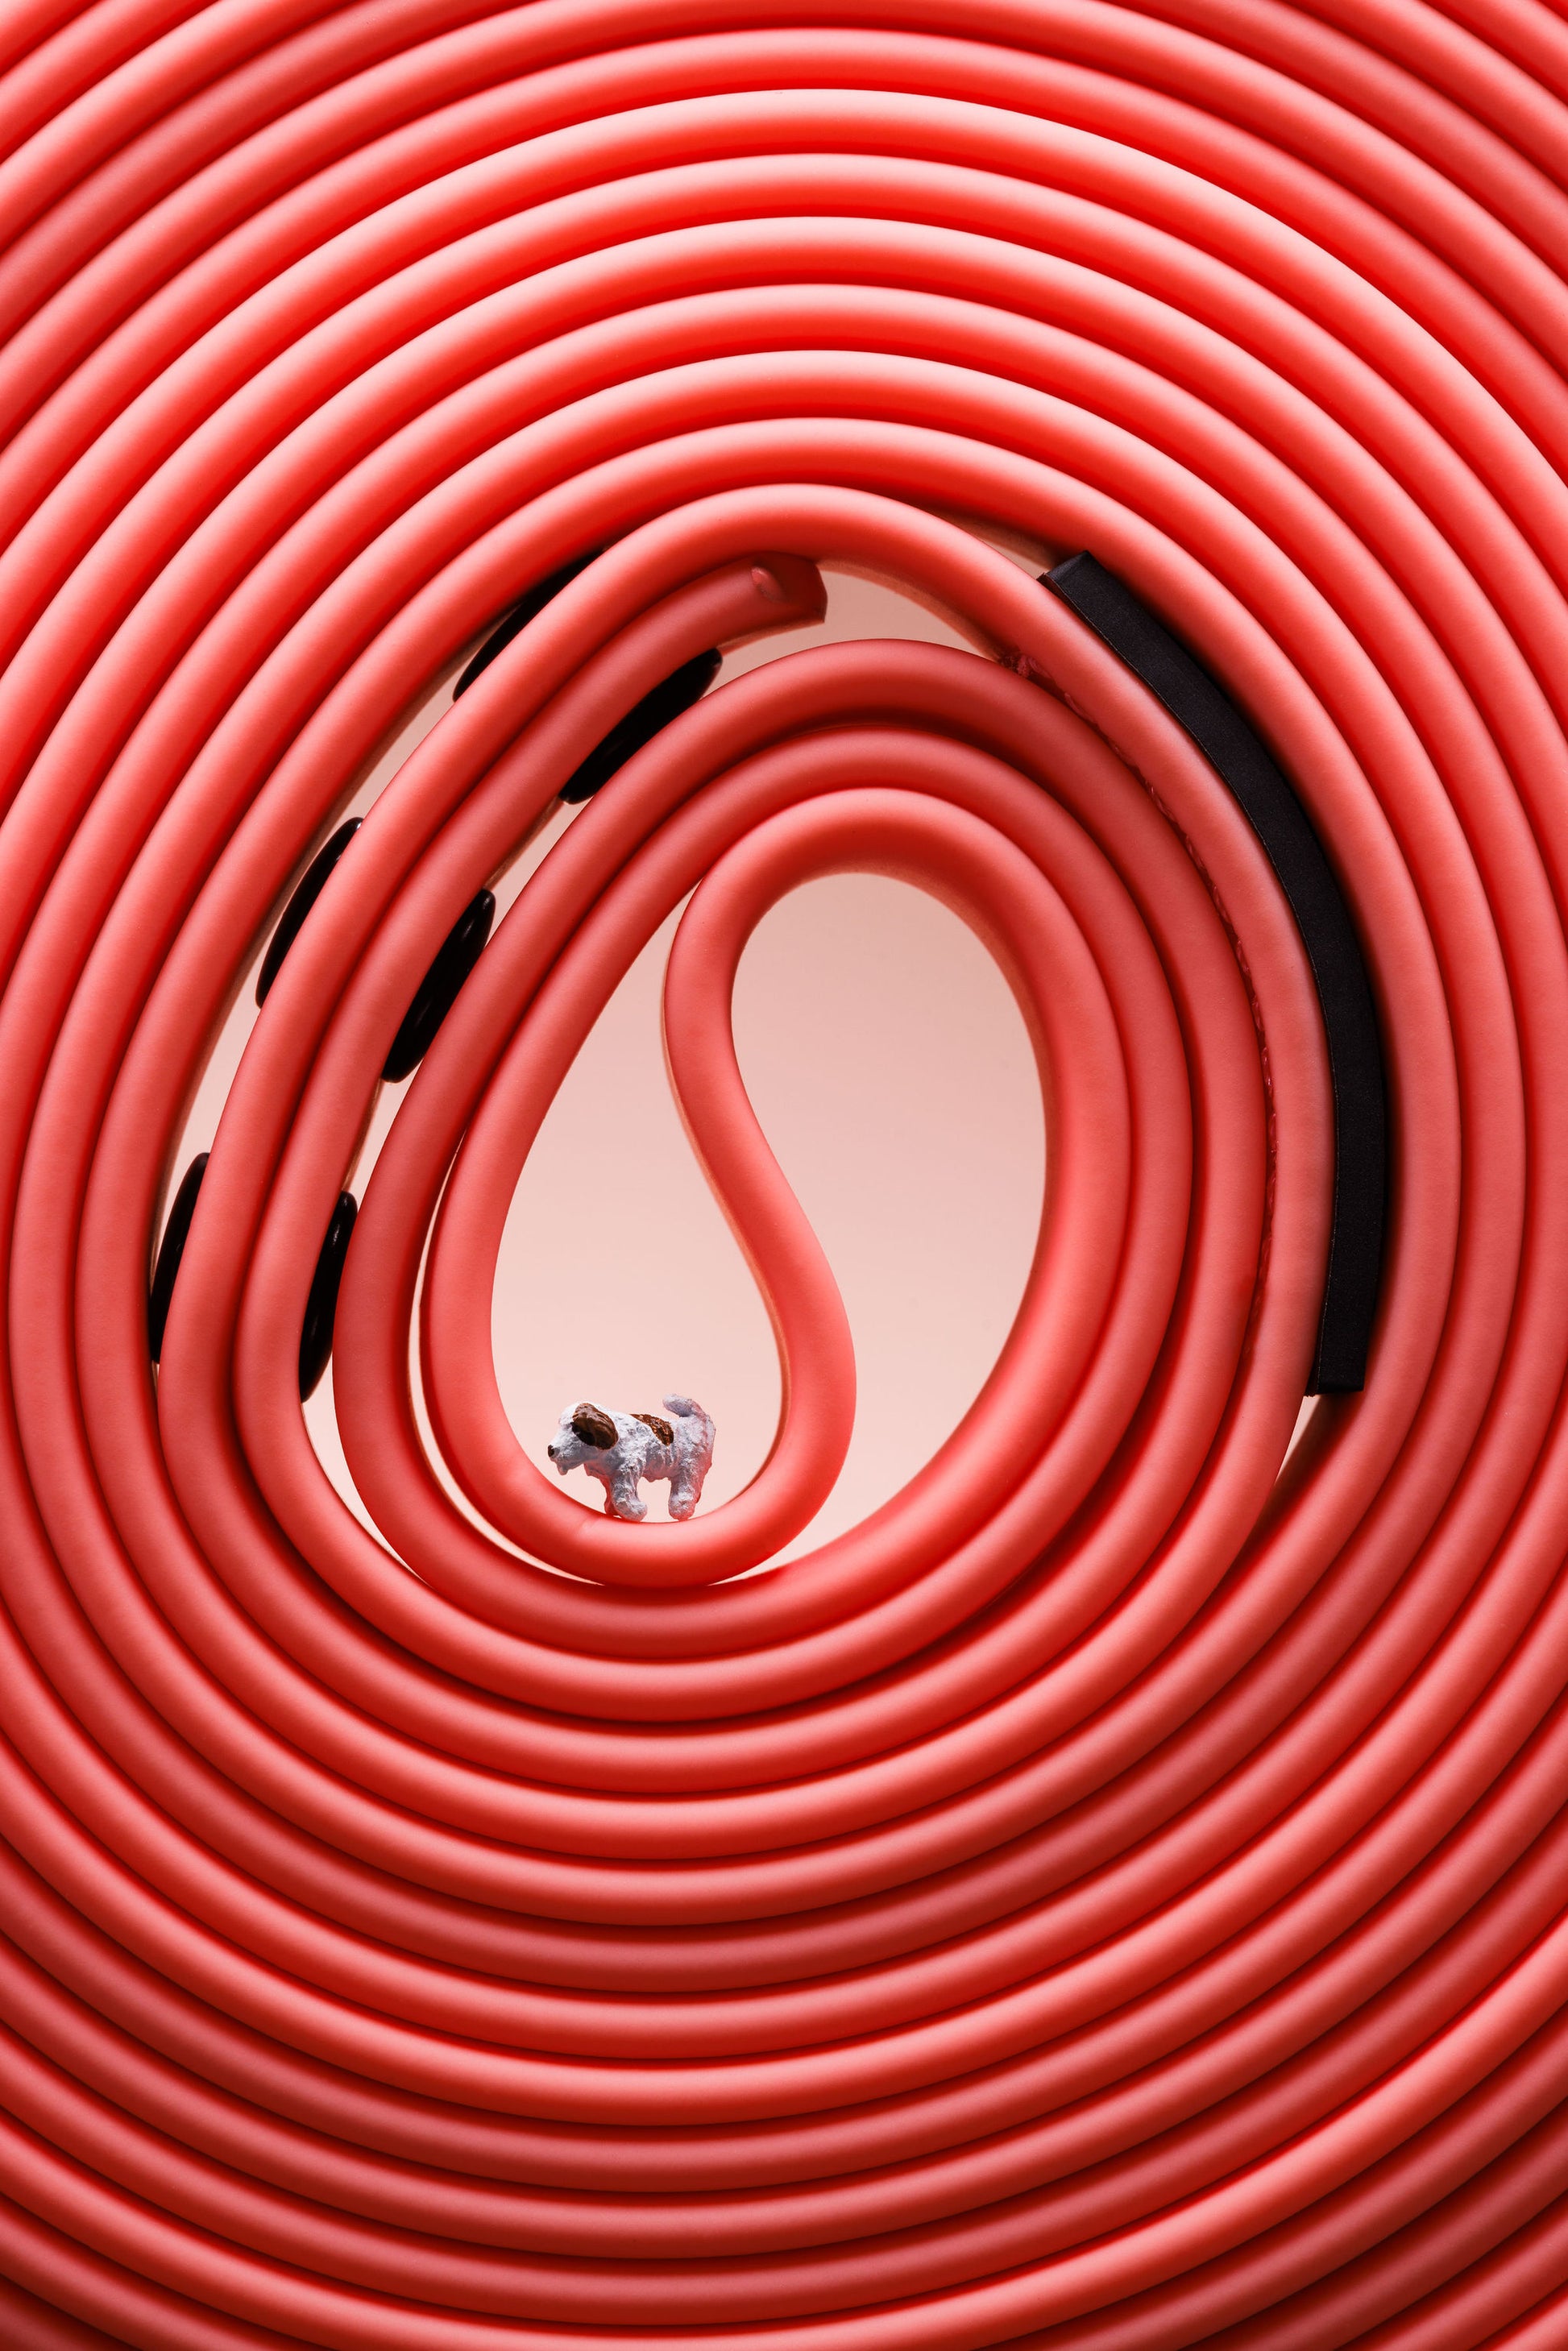 Close up of a coral 5m rubber coated lead rolled up and laid flat on a white background, with a small white and brown model dog  in the middle of the roll.